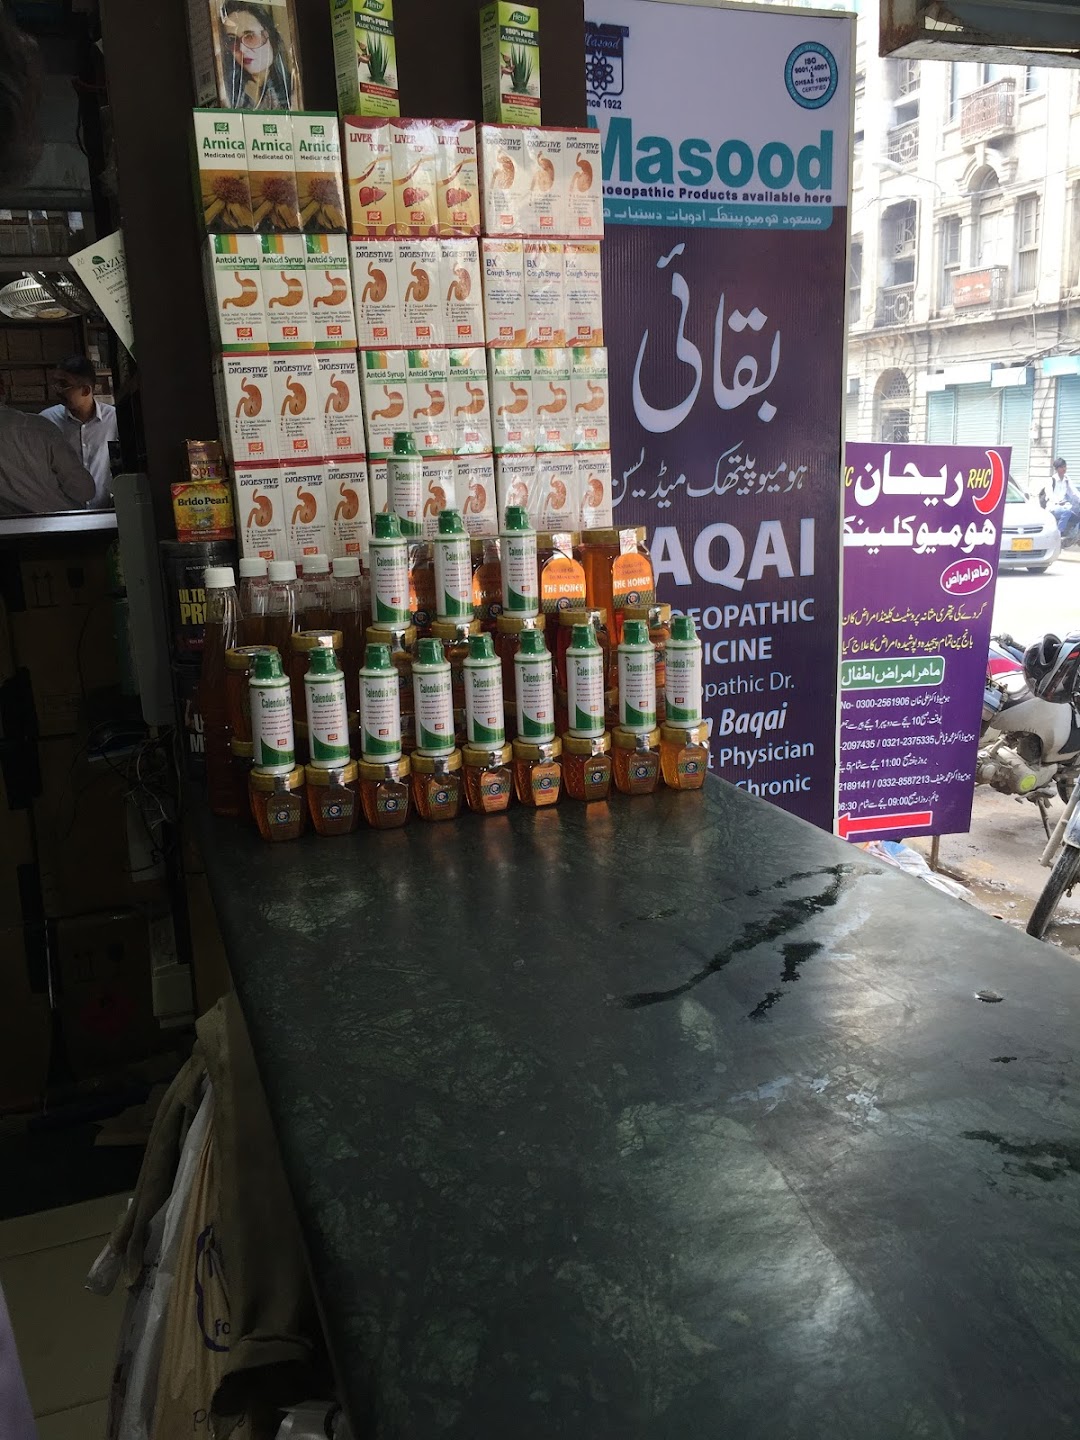 Baqai Homoeopathic store